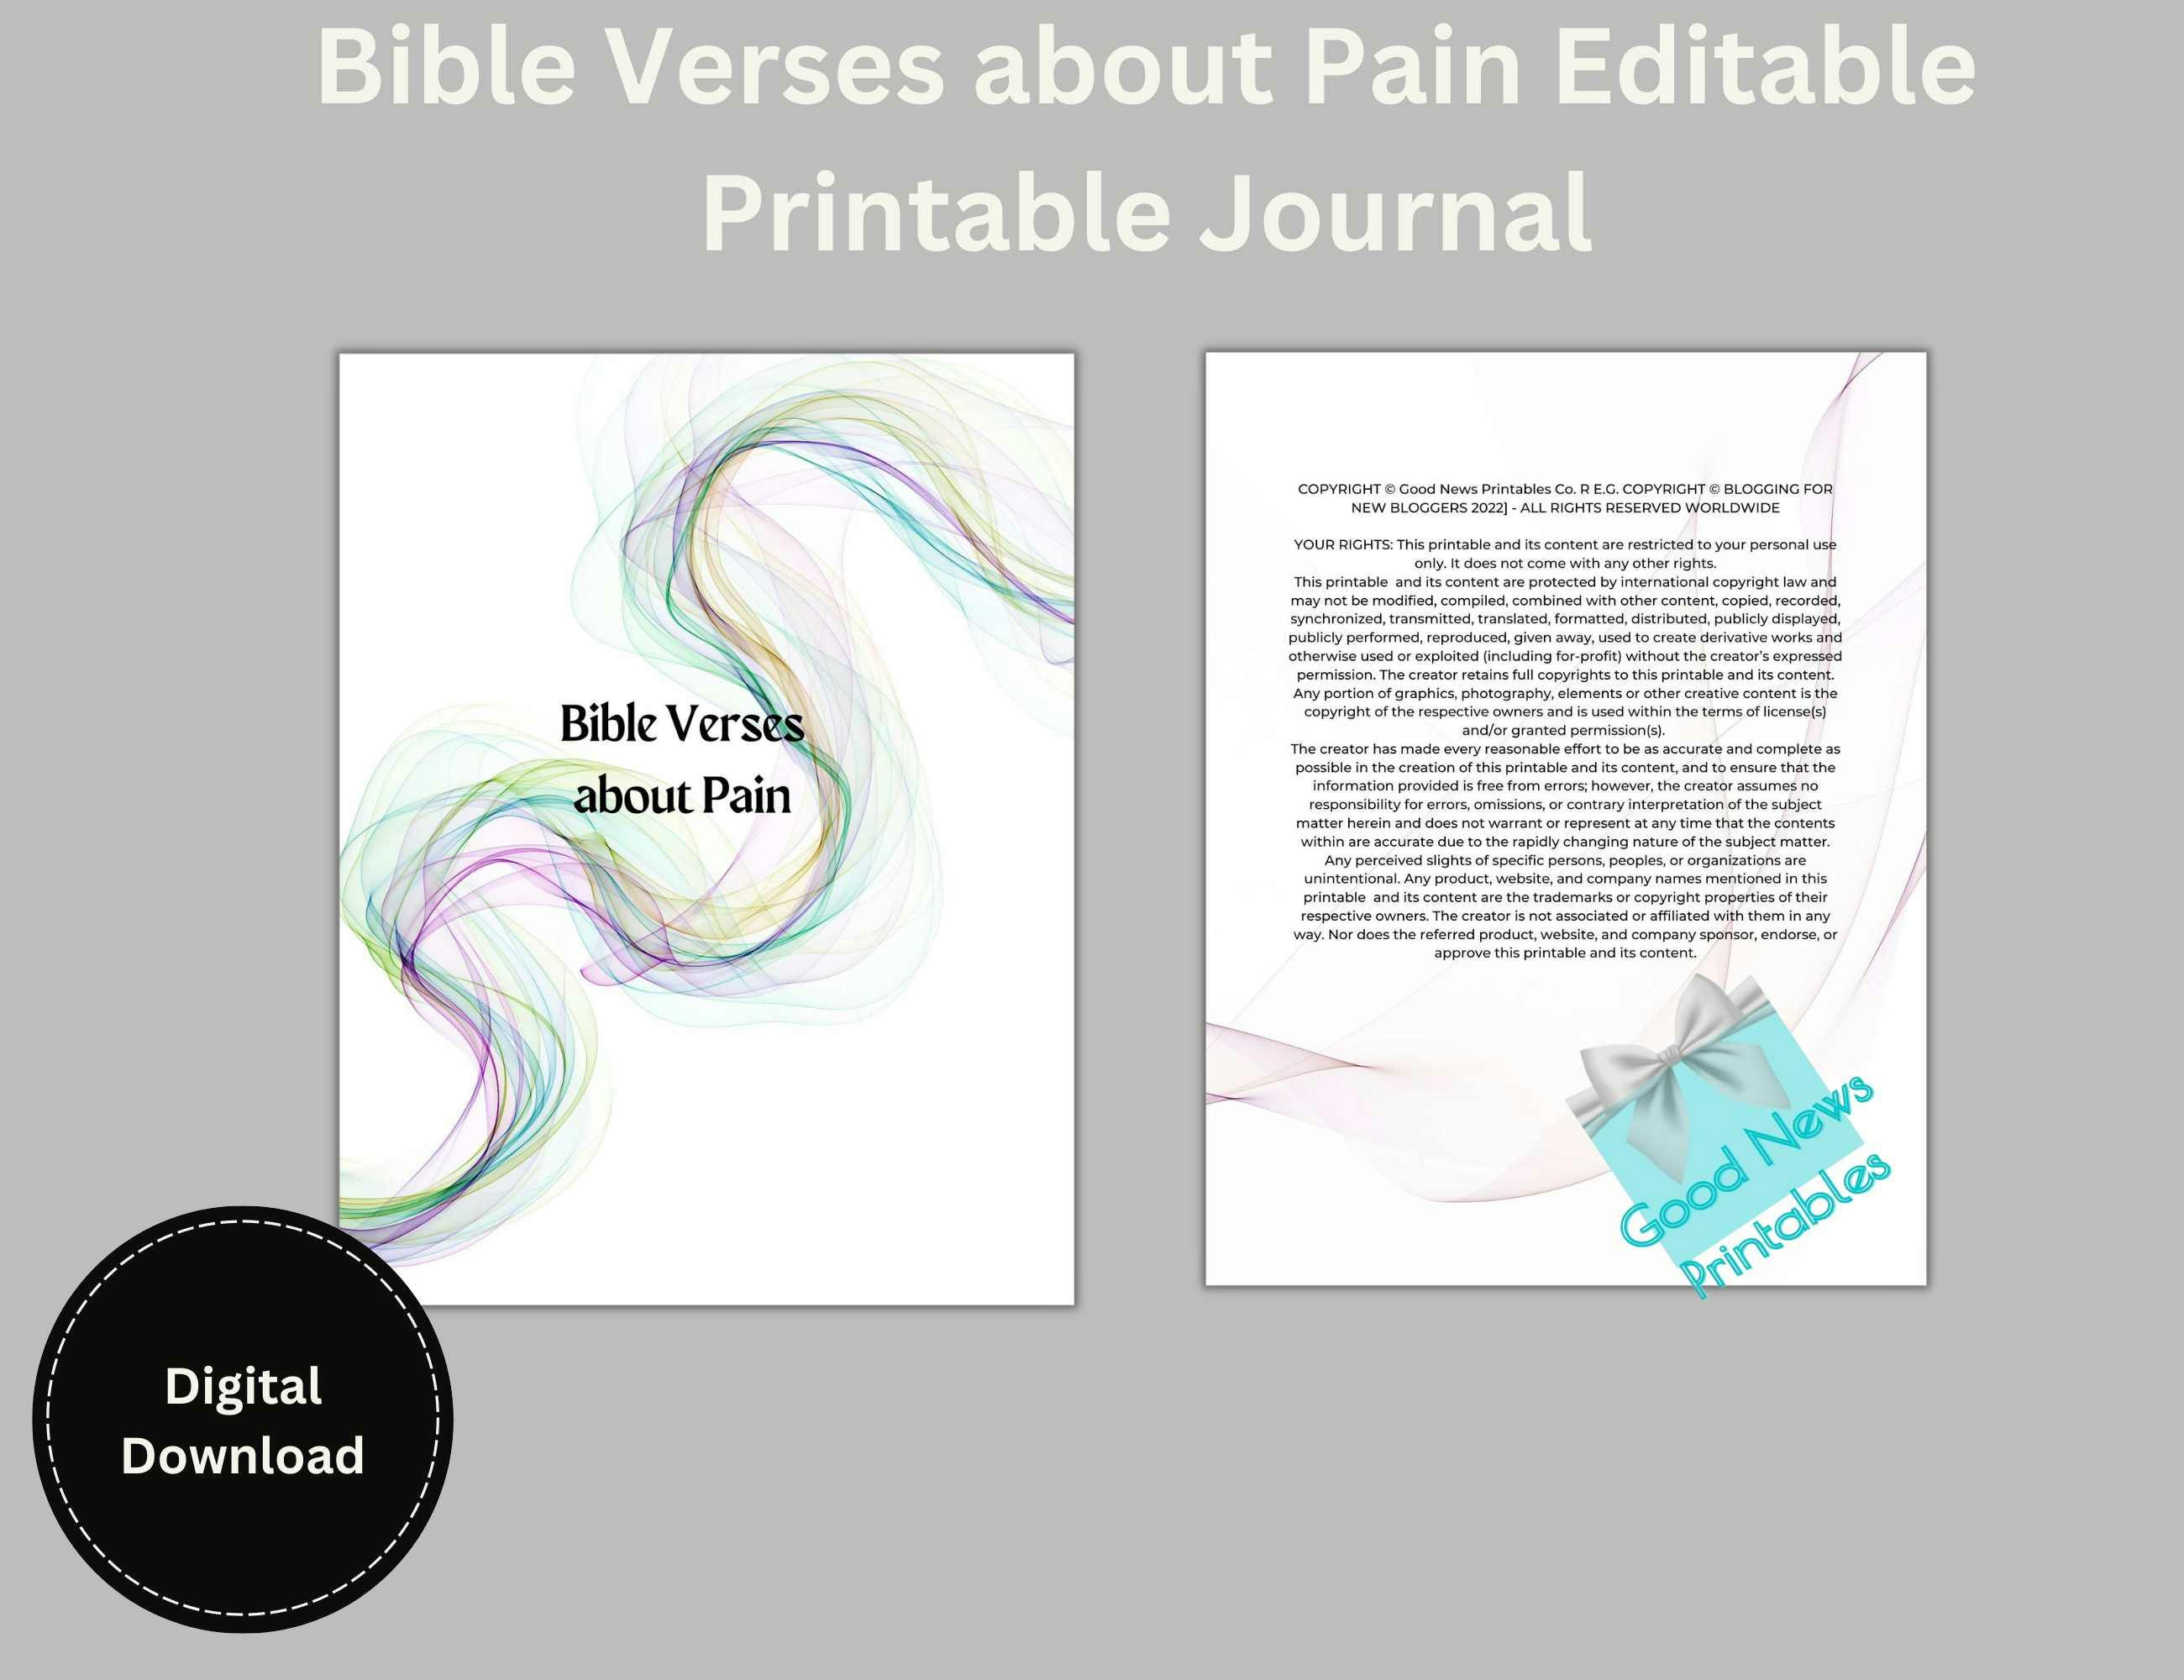 Bible Verses about Pain Editable Printable Journal, US Letter & A4 size